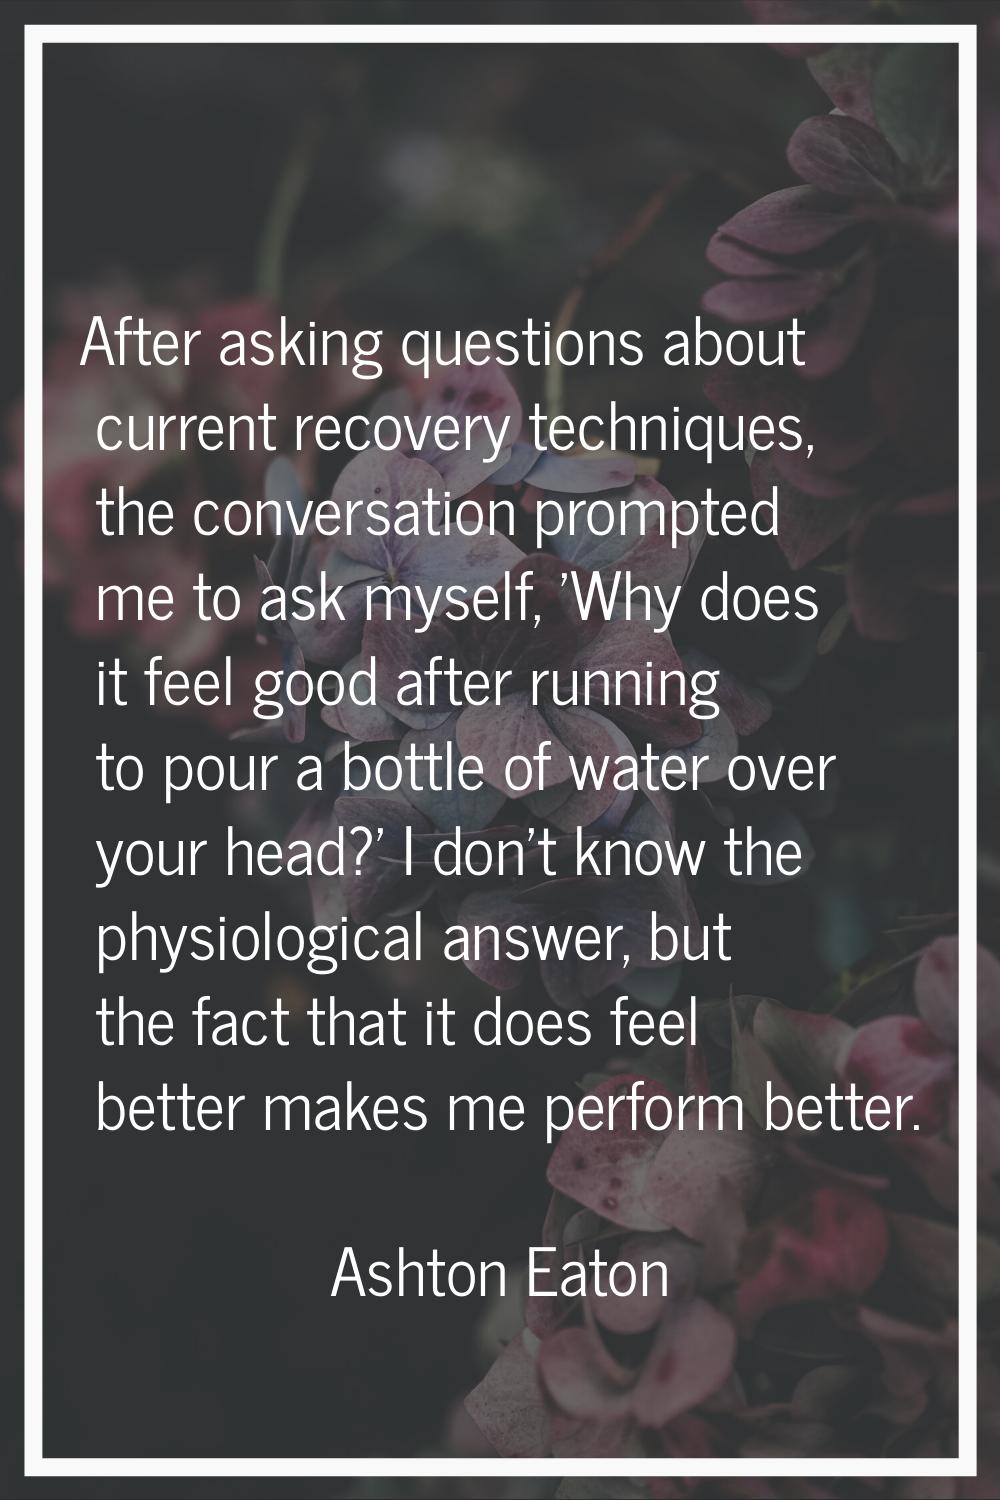 After asking questions about current recovery techniques, the conversation prompted me to ask mysel